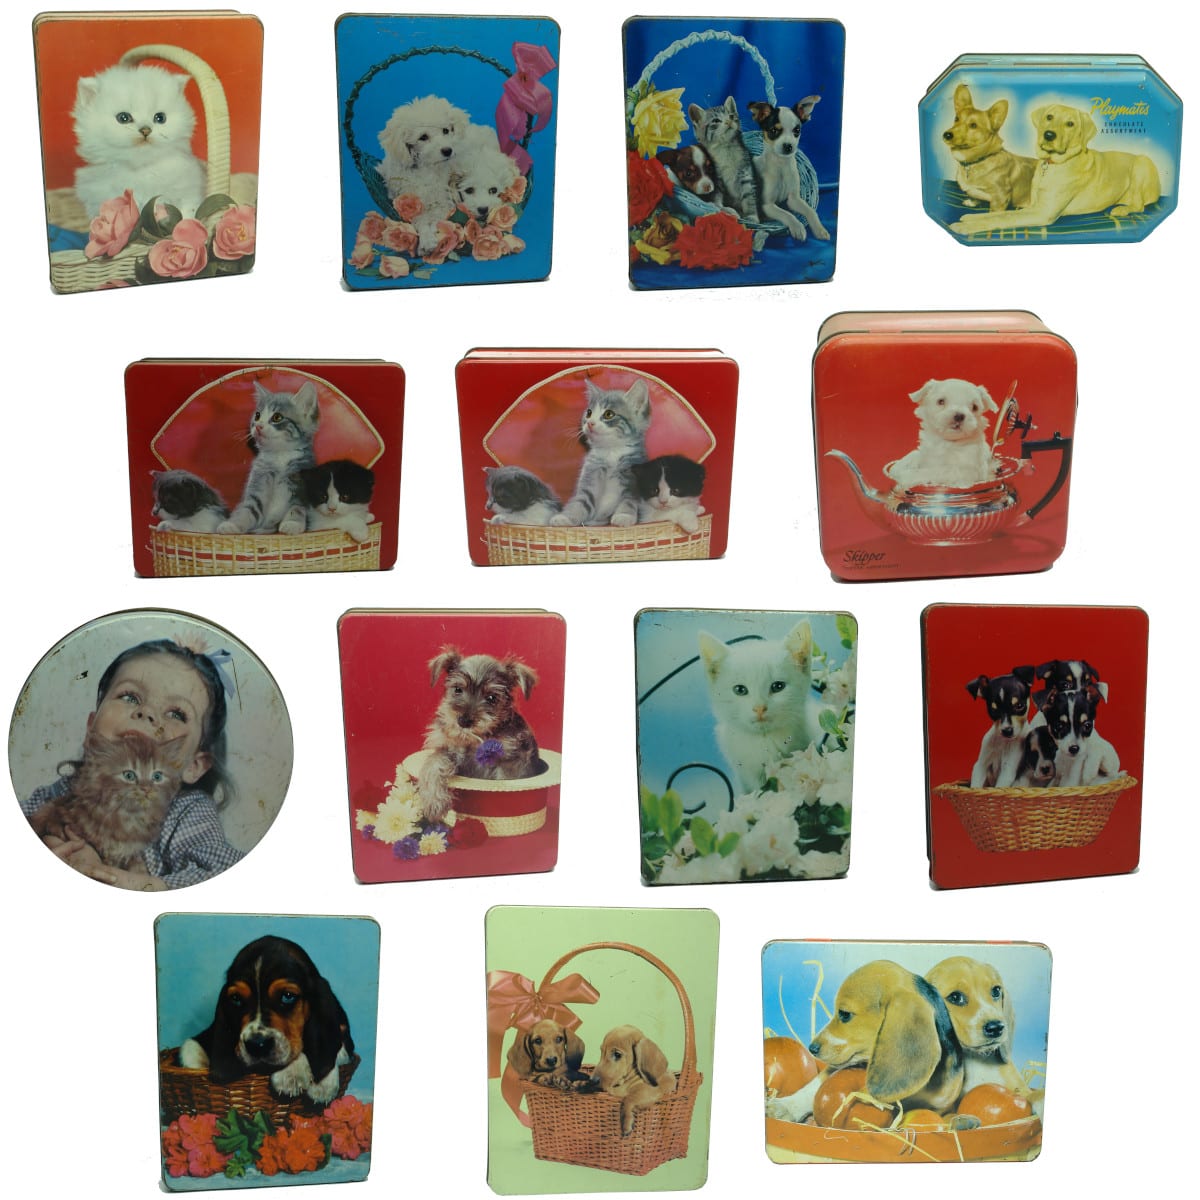 14 MacRobertson's Chocolate and Toffee Tins. All with pictures of Puppies or Kittens. MacRobertsons.